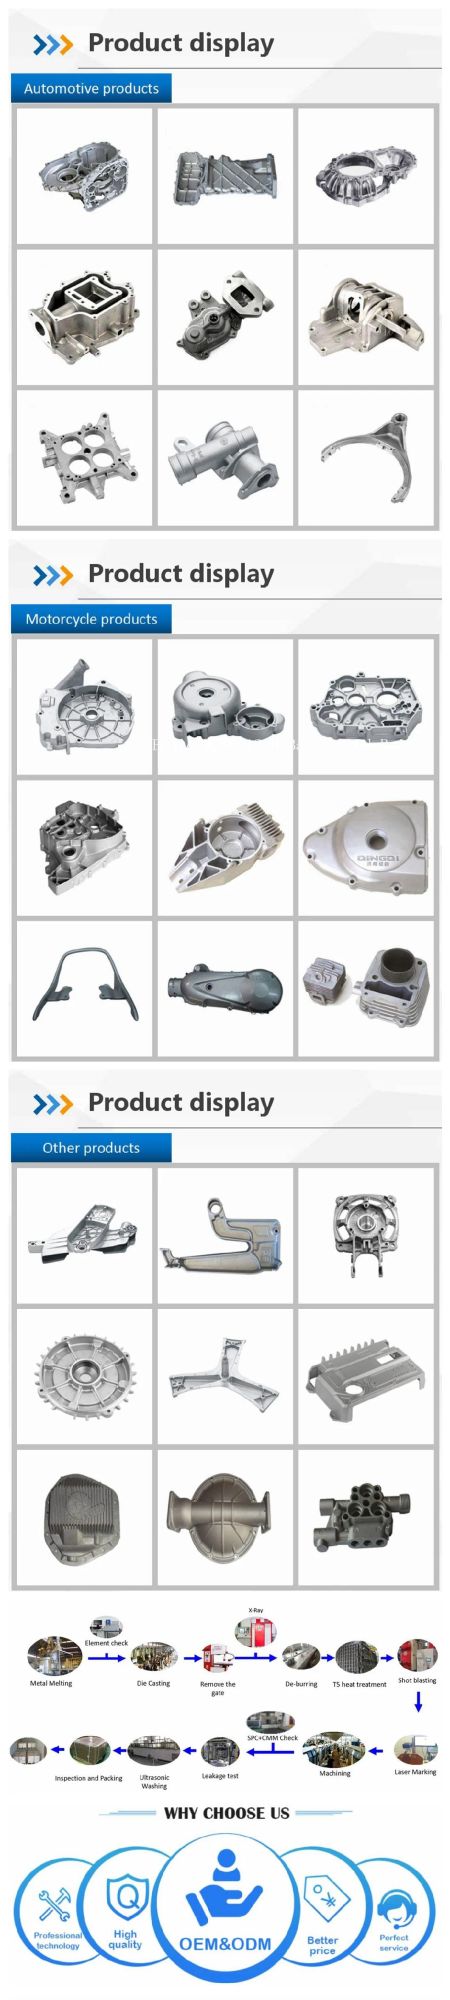 China OEM High Precision Die Casting Mould Mold Die Casting Die Casting Mold Design